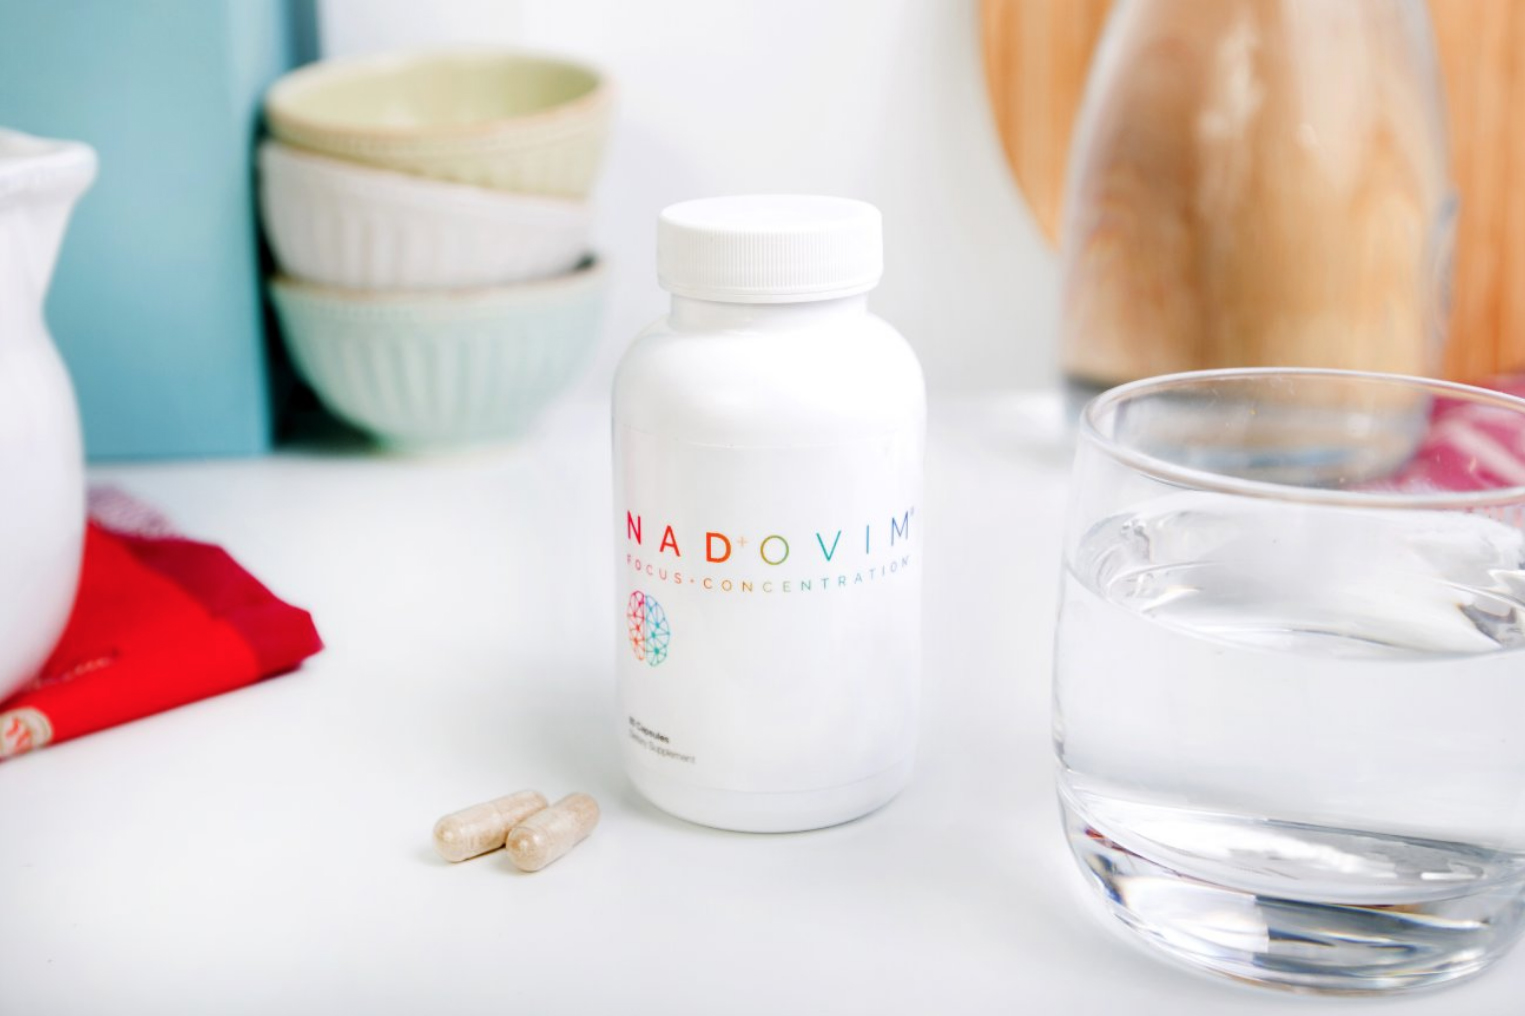 The two-year development of Nadovim was radically different compared to the evolution of other nutraceutical supplements.